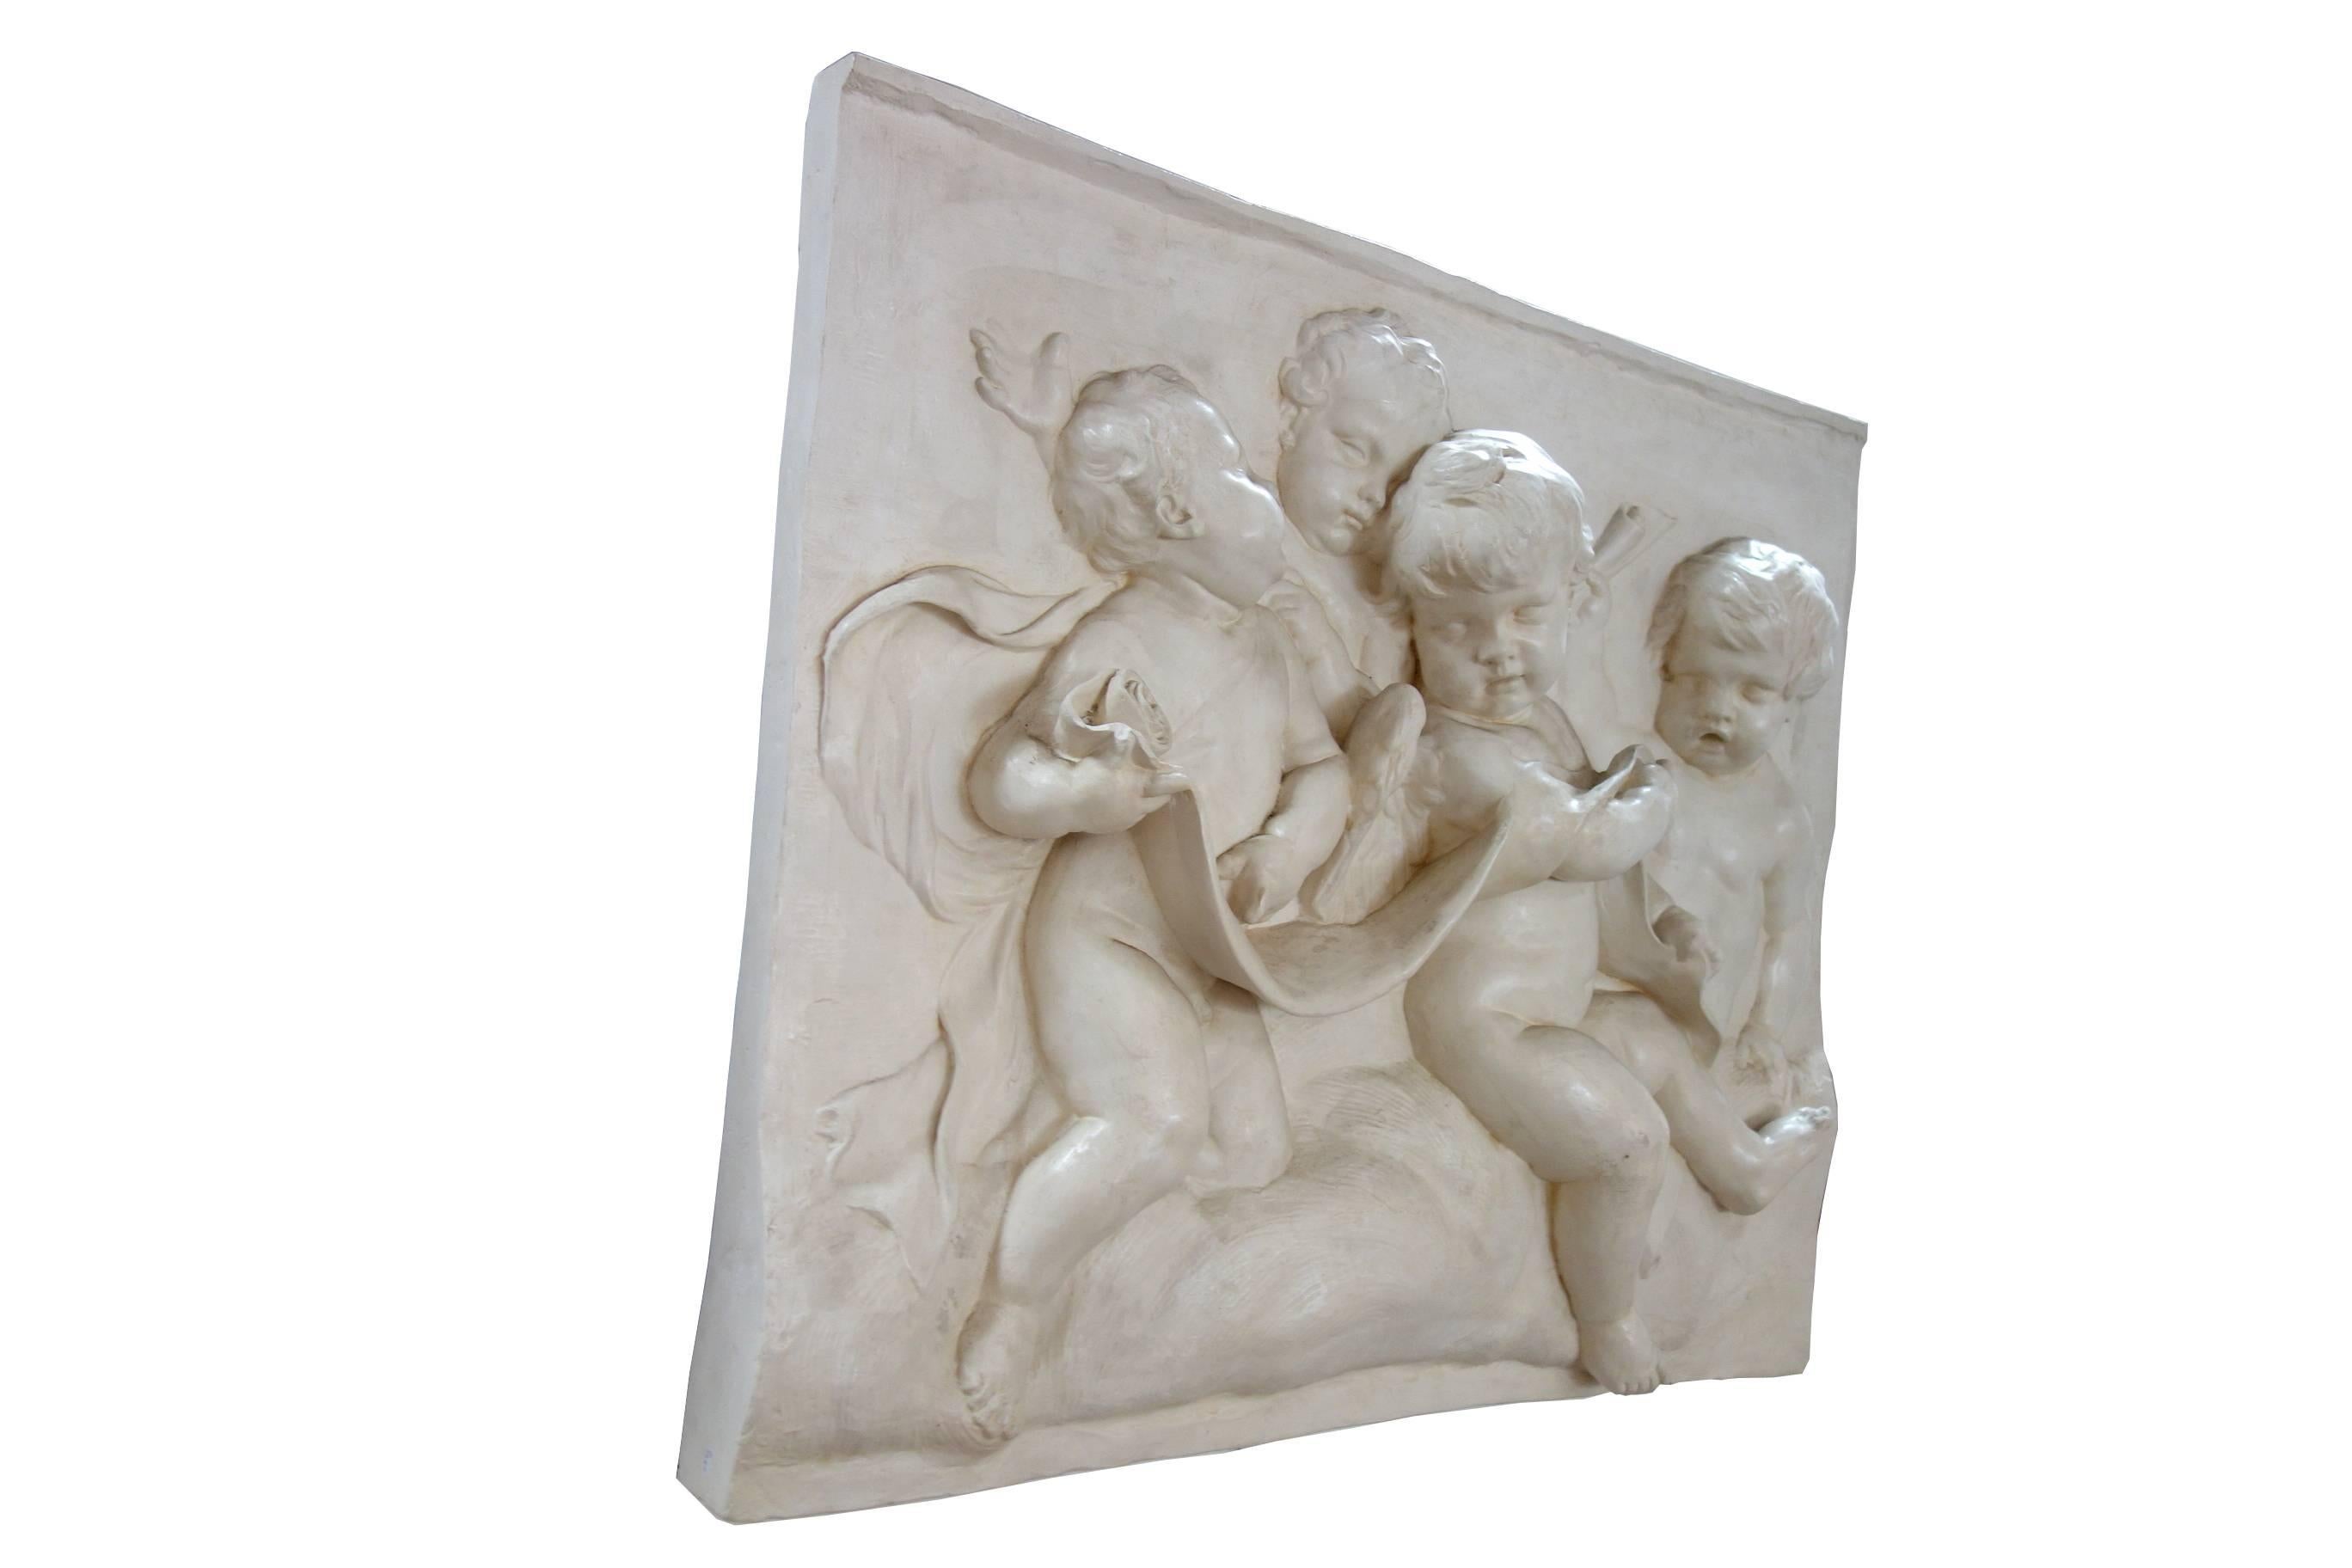 Charming high relief wall plaque in unusually large size, featuring four cherubs. Plaster patinated.

Dimensions are 38 1/2